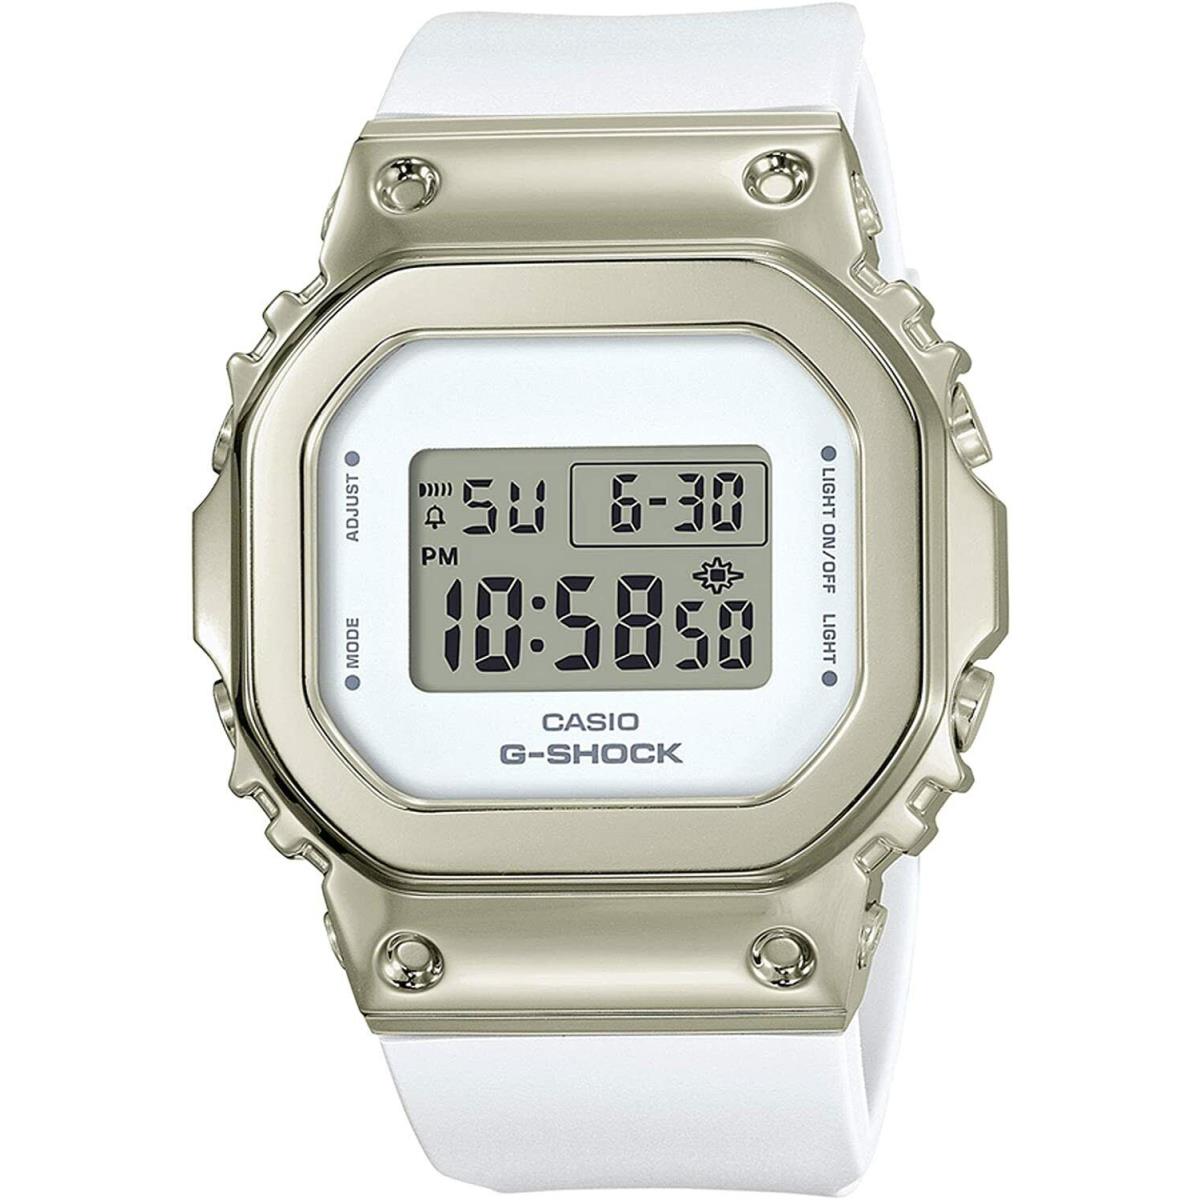 Casio G-shock Square Digital Watch White Resin GMS-5600G-7 / GMS5600G-7 - Gray Dial, White Band